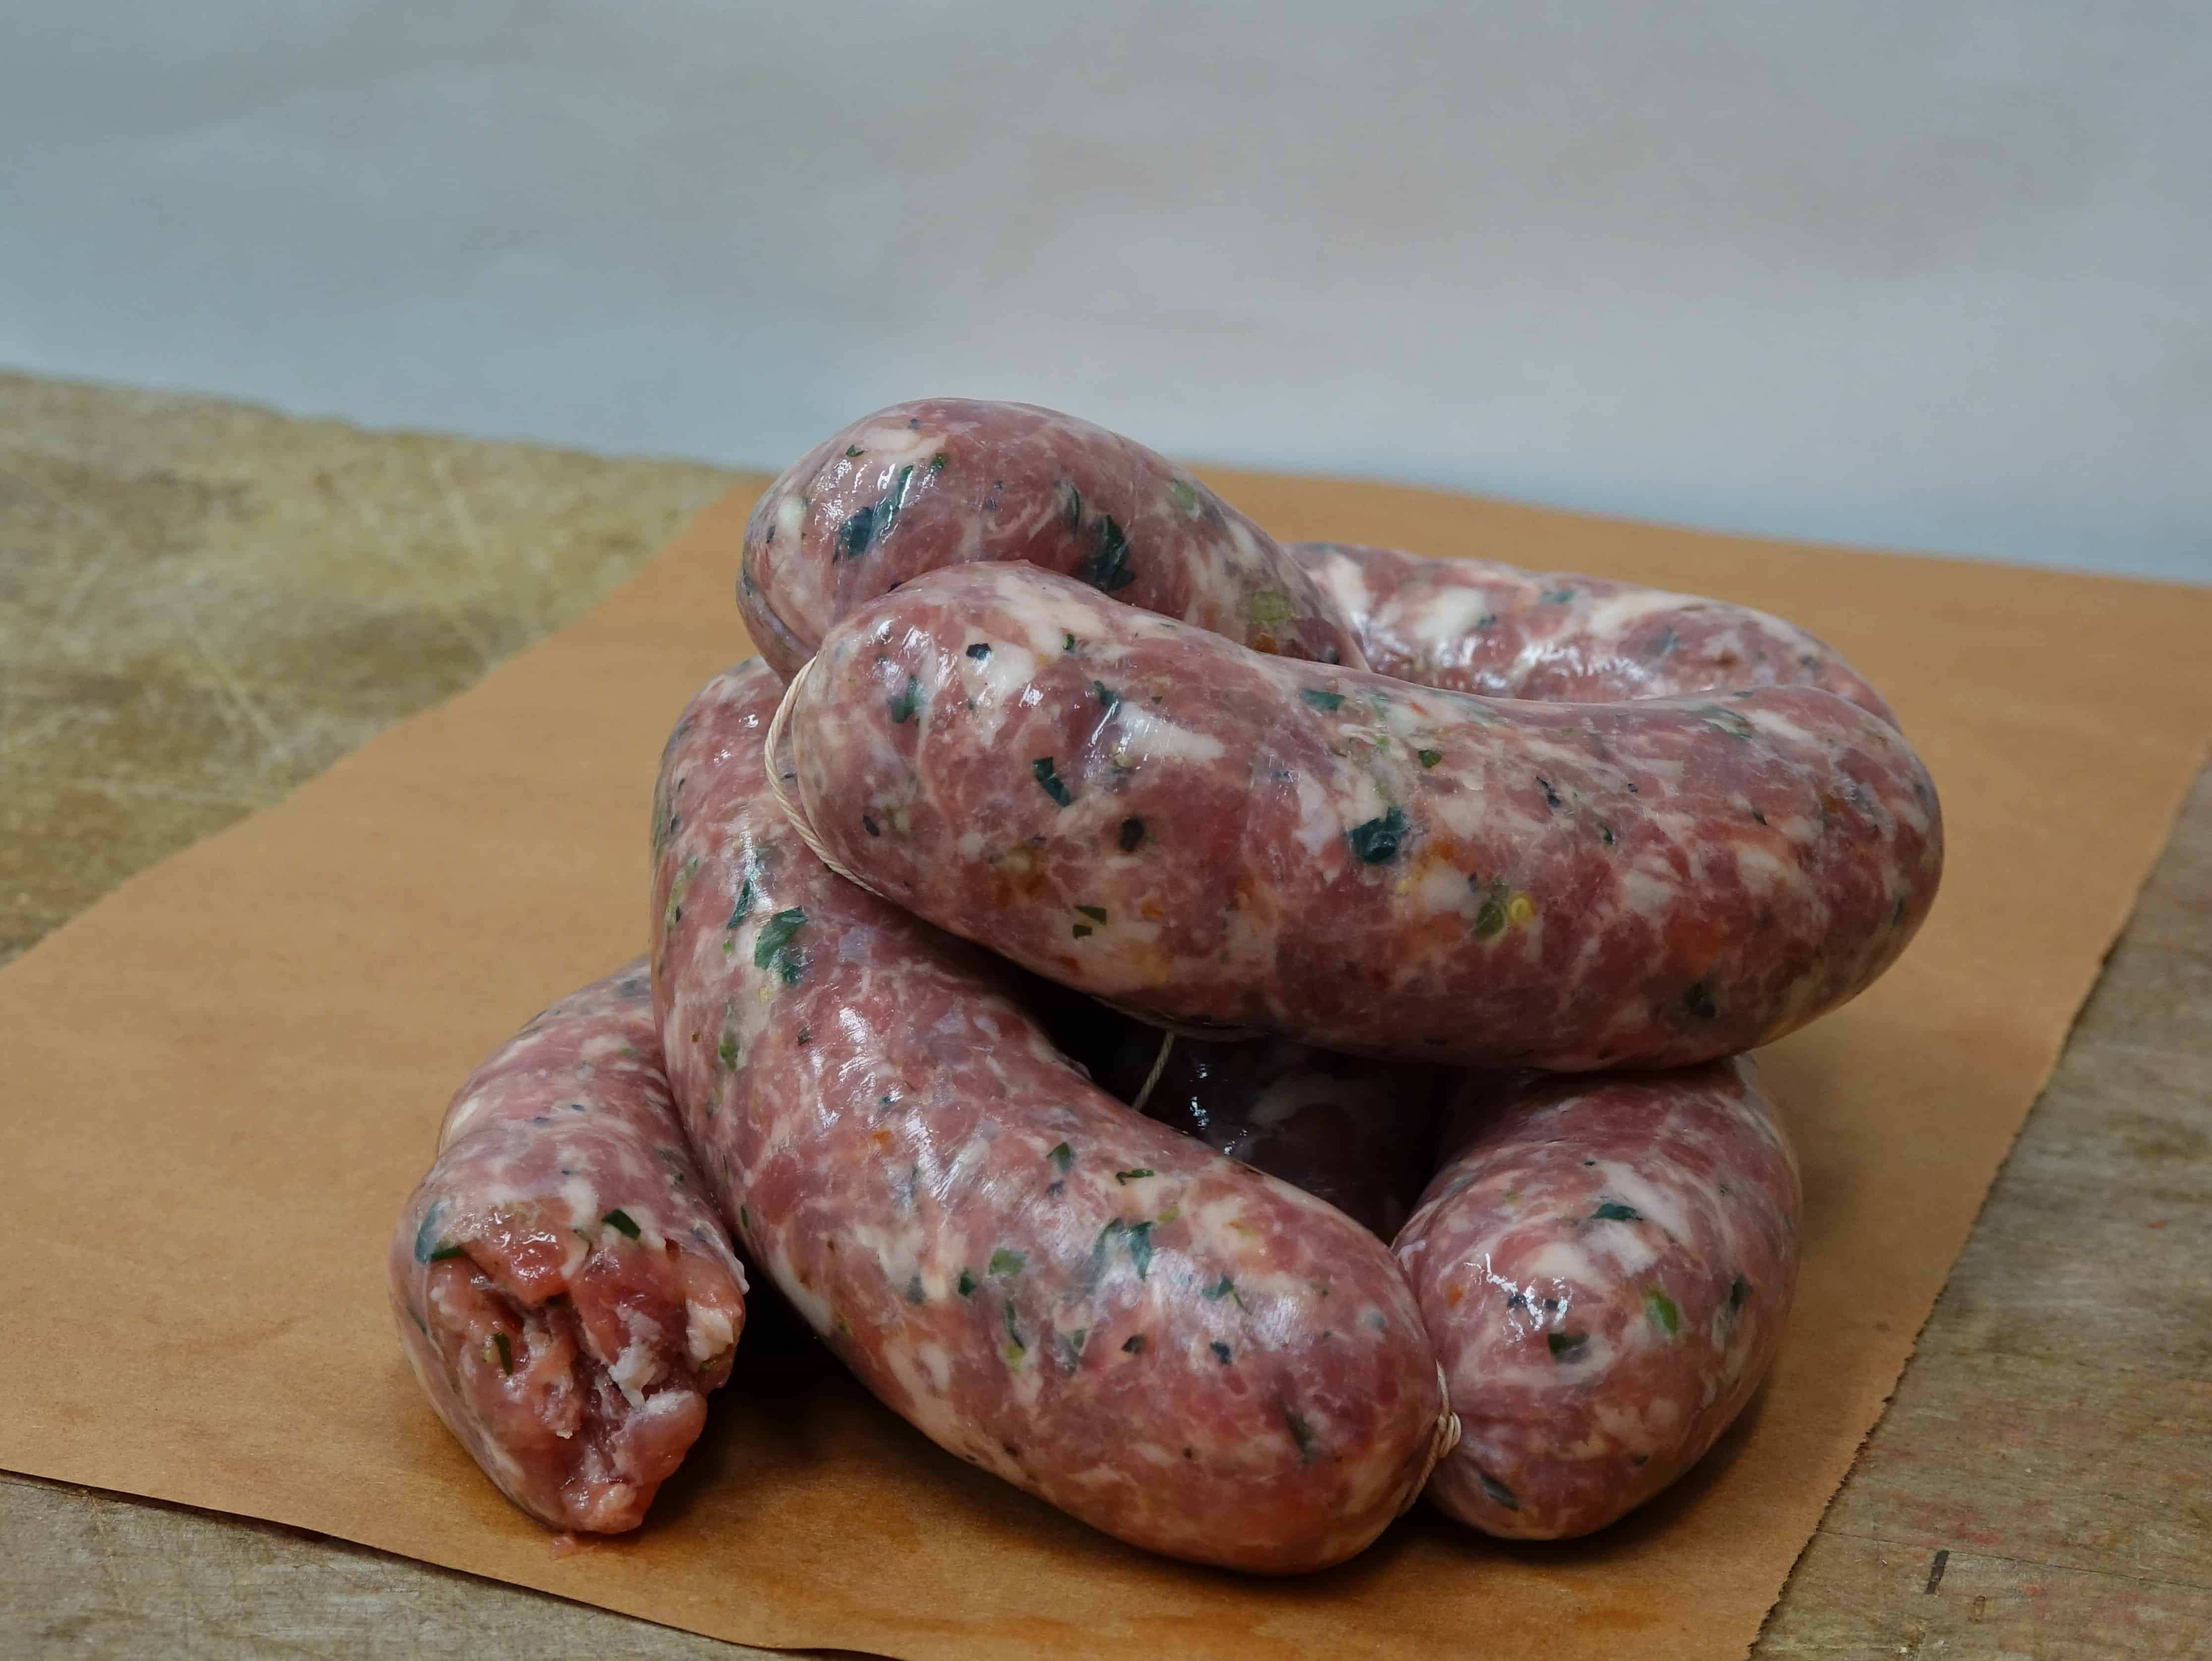 VINCENT'S BROCCOLI RABE SAUSAGE - Thick (1 lb. Pack/4 Links)